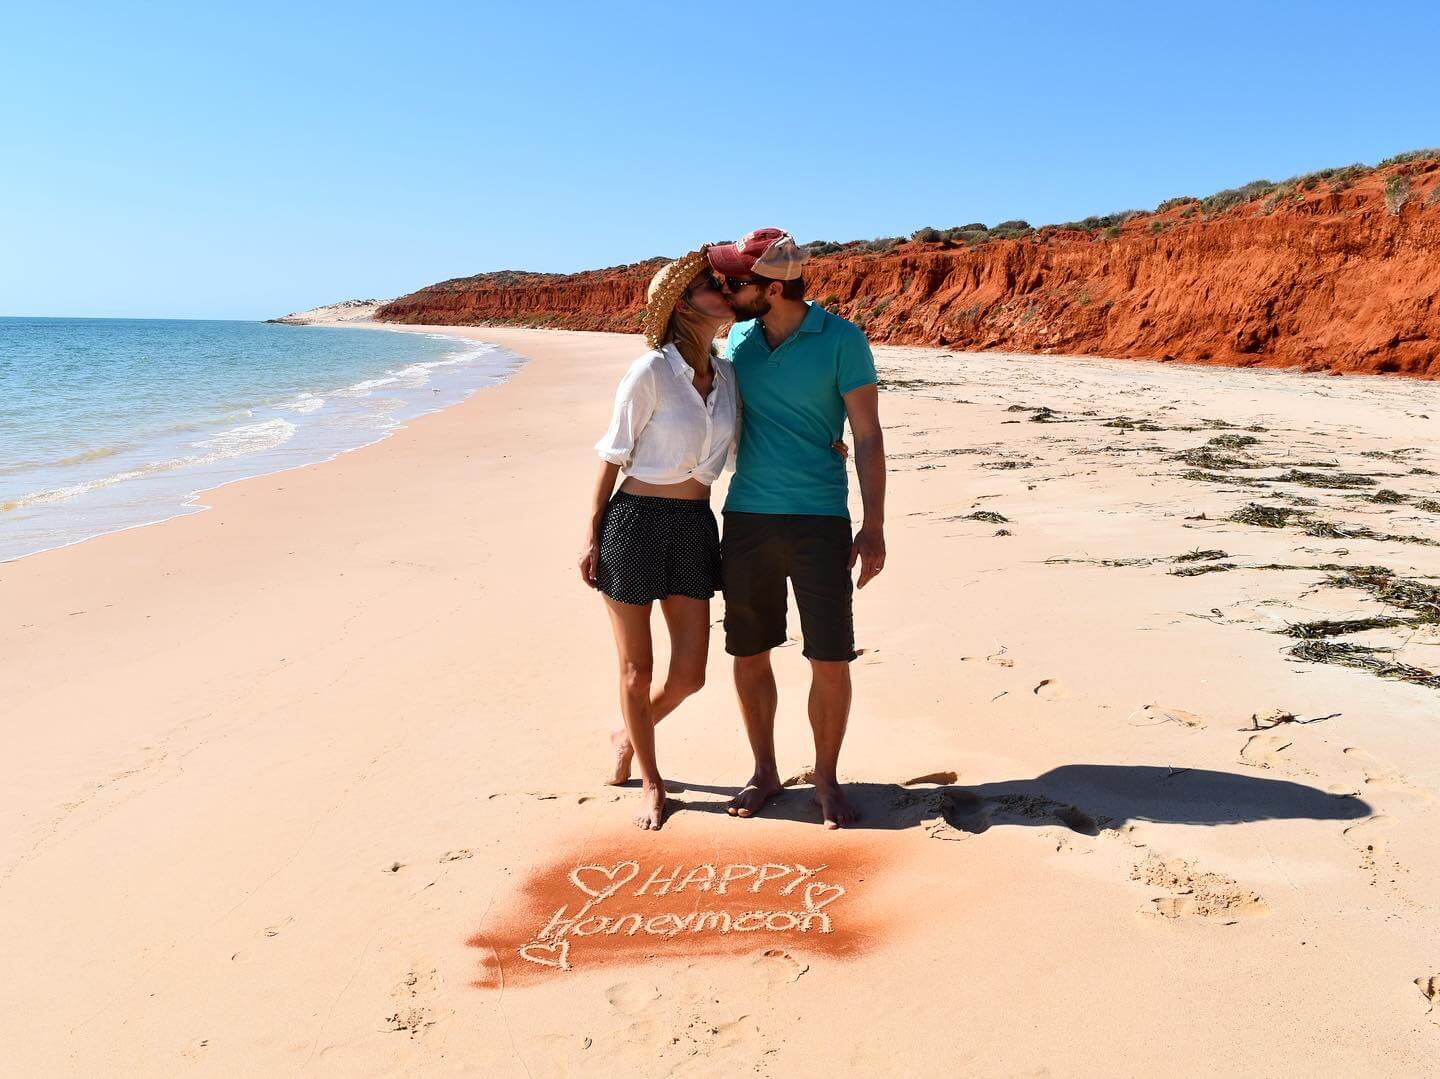 Hayley and Enrico on a beach in Western Australia with 'Happy Honeymoon' engraved in the sand